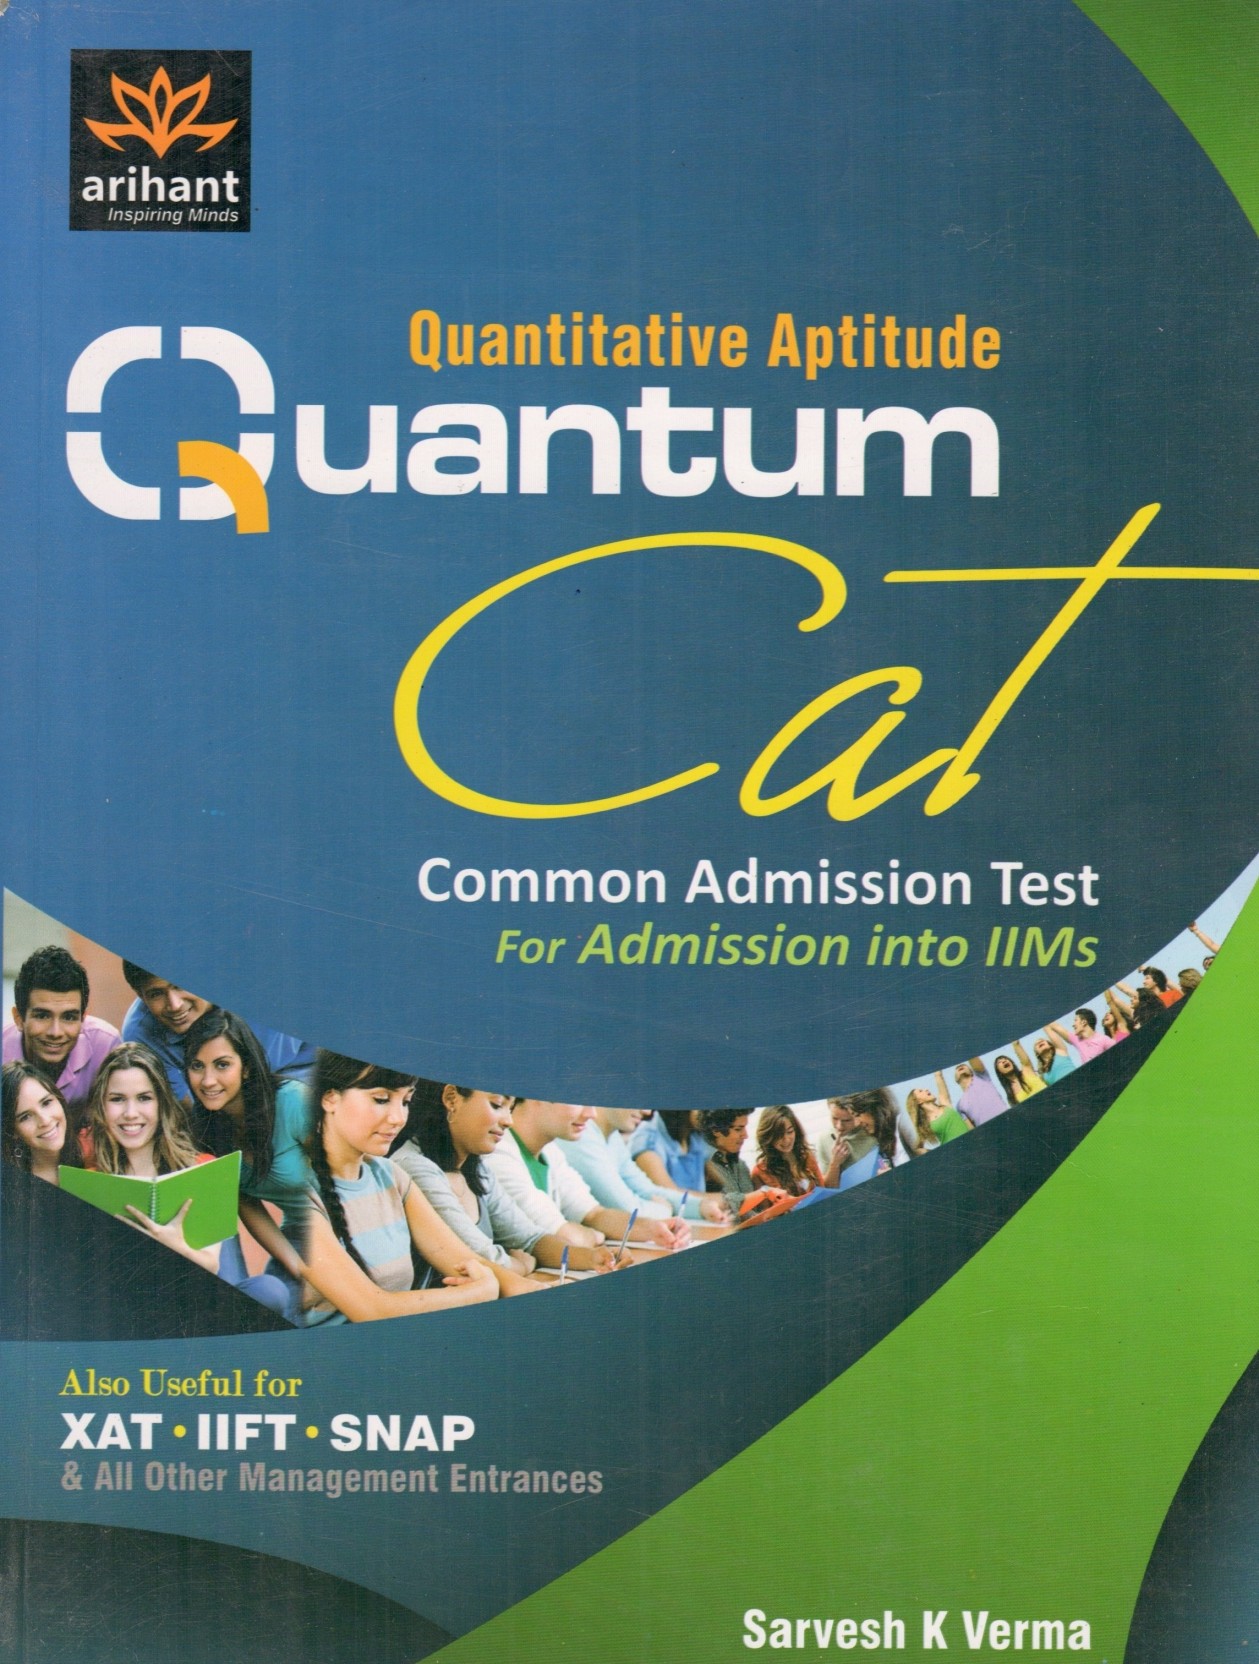 university-of-oxford-admission-requirements-sat-act-ielts-gpa-scores-needed-gotouniversity